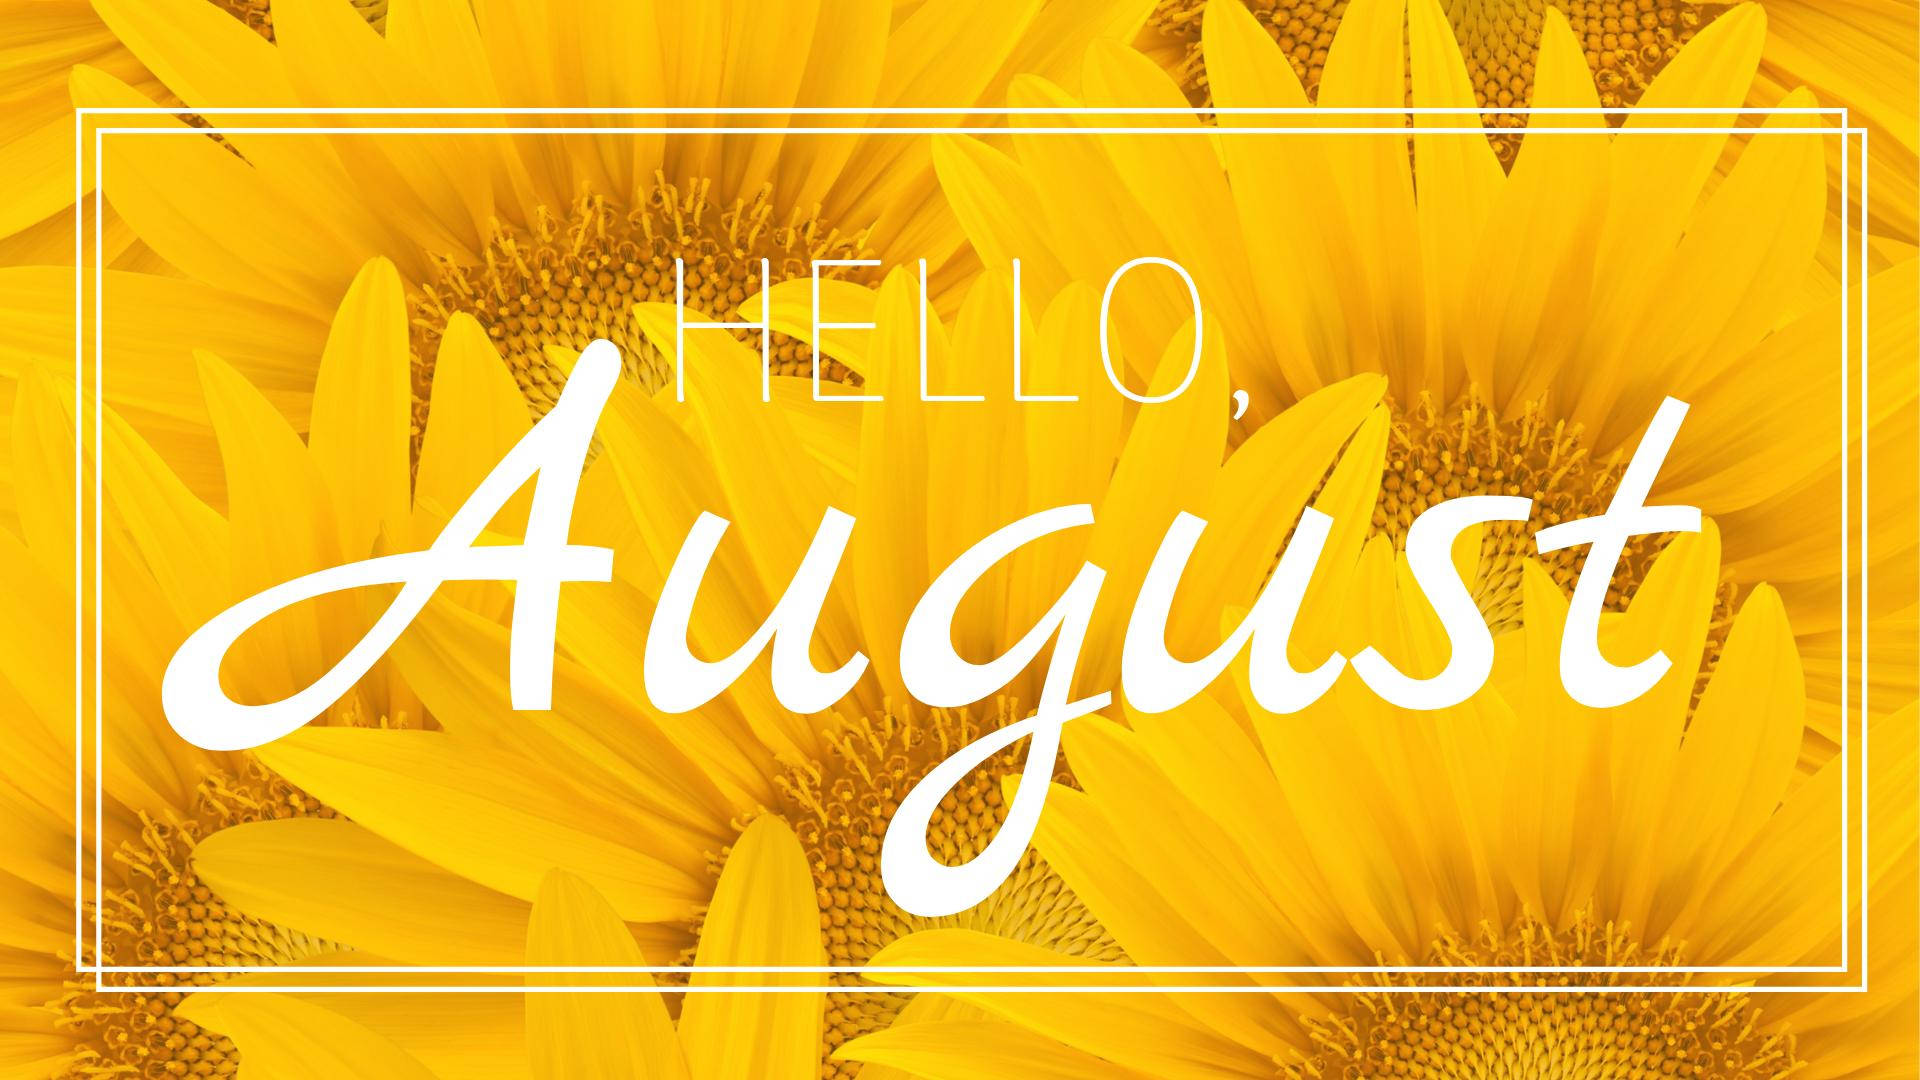 Free August Wallpaper Downloads, [100+] August Wallpapers for FREE |  